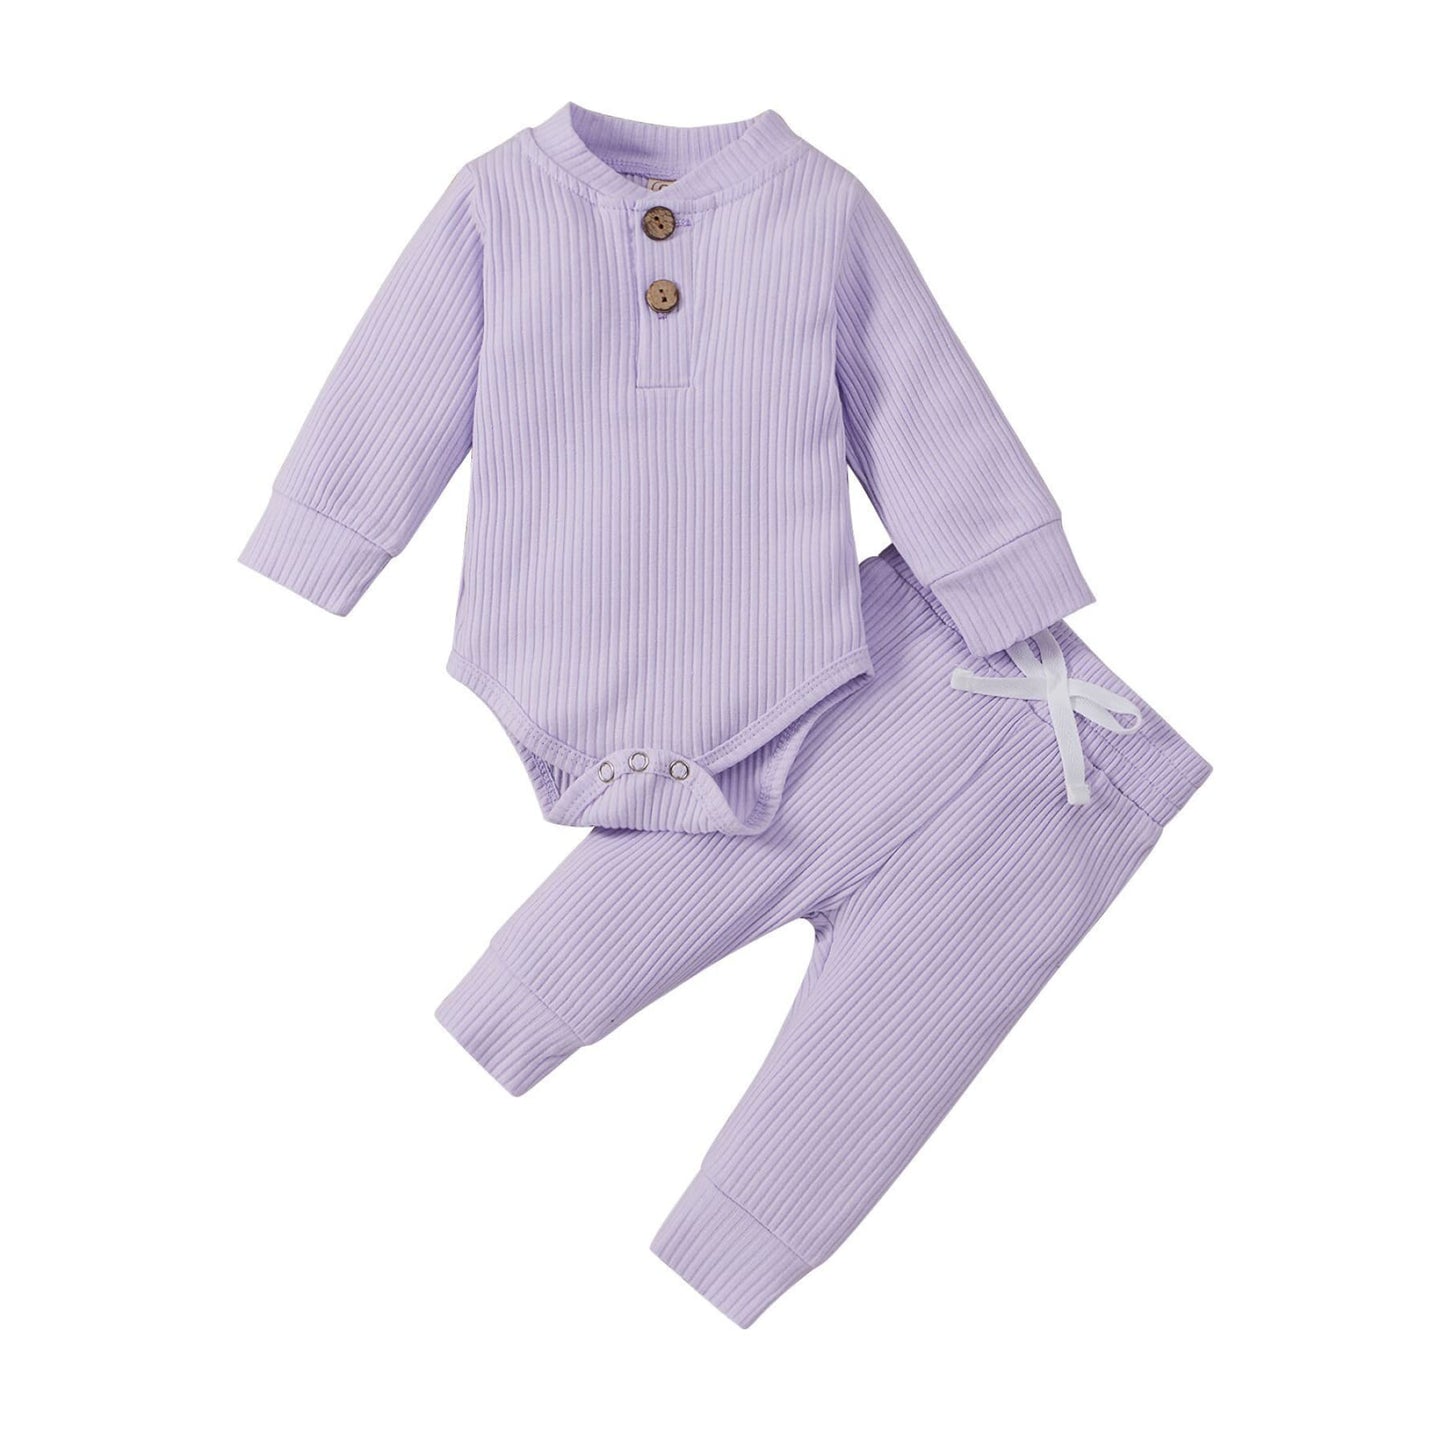 Lavander baby track suit with romper or onesie and pants- Hunny Bubba Kids